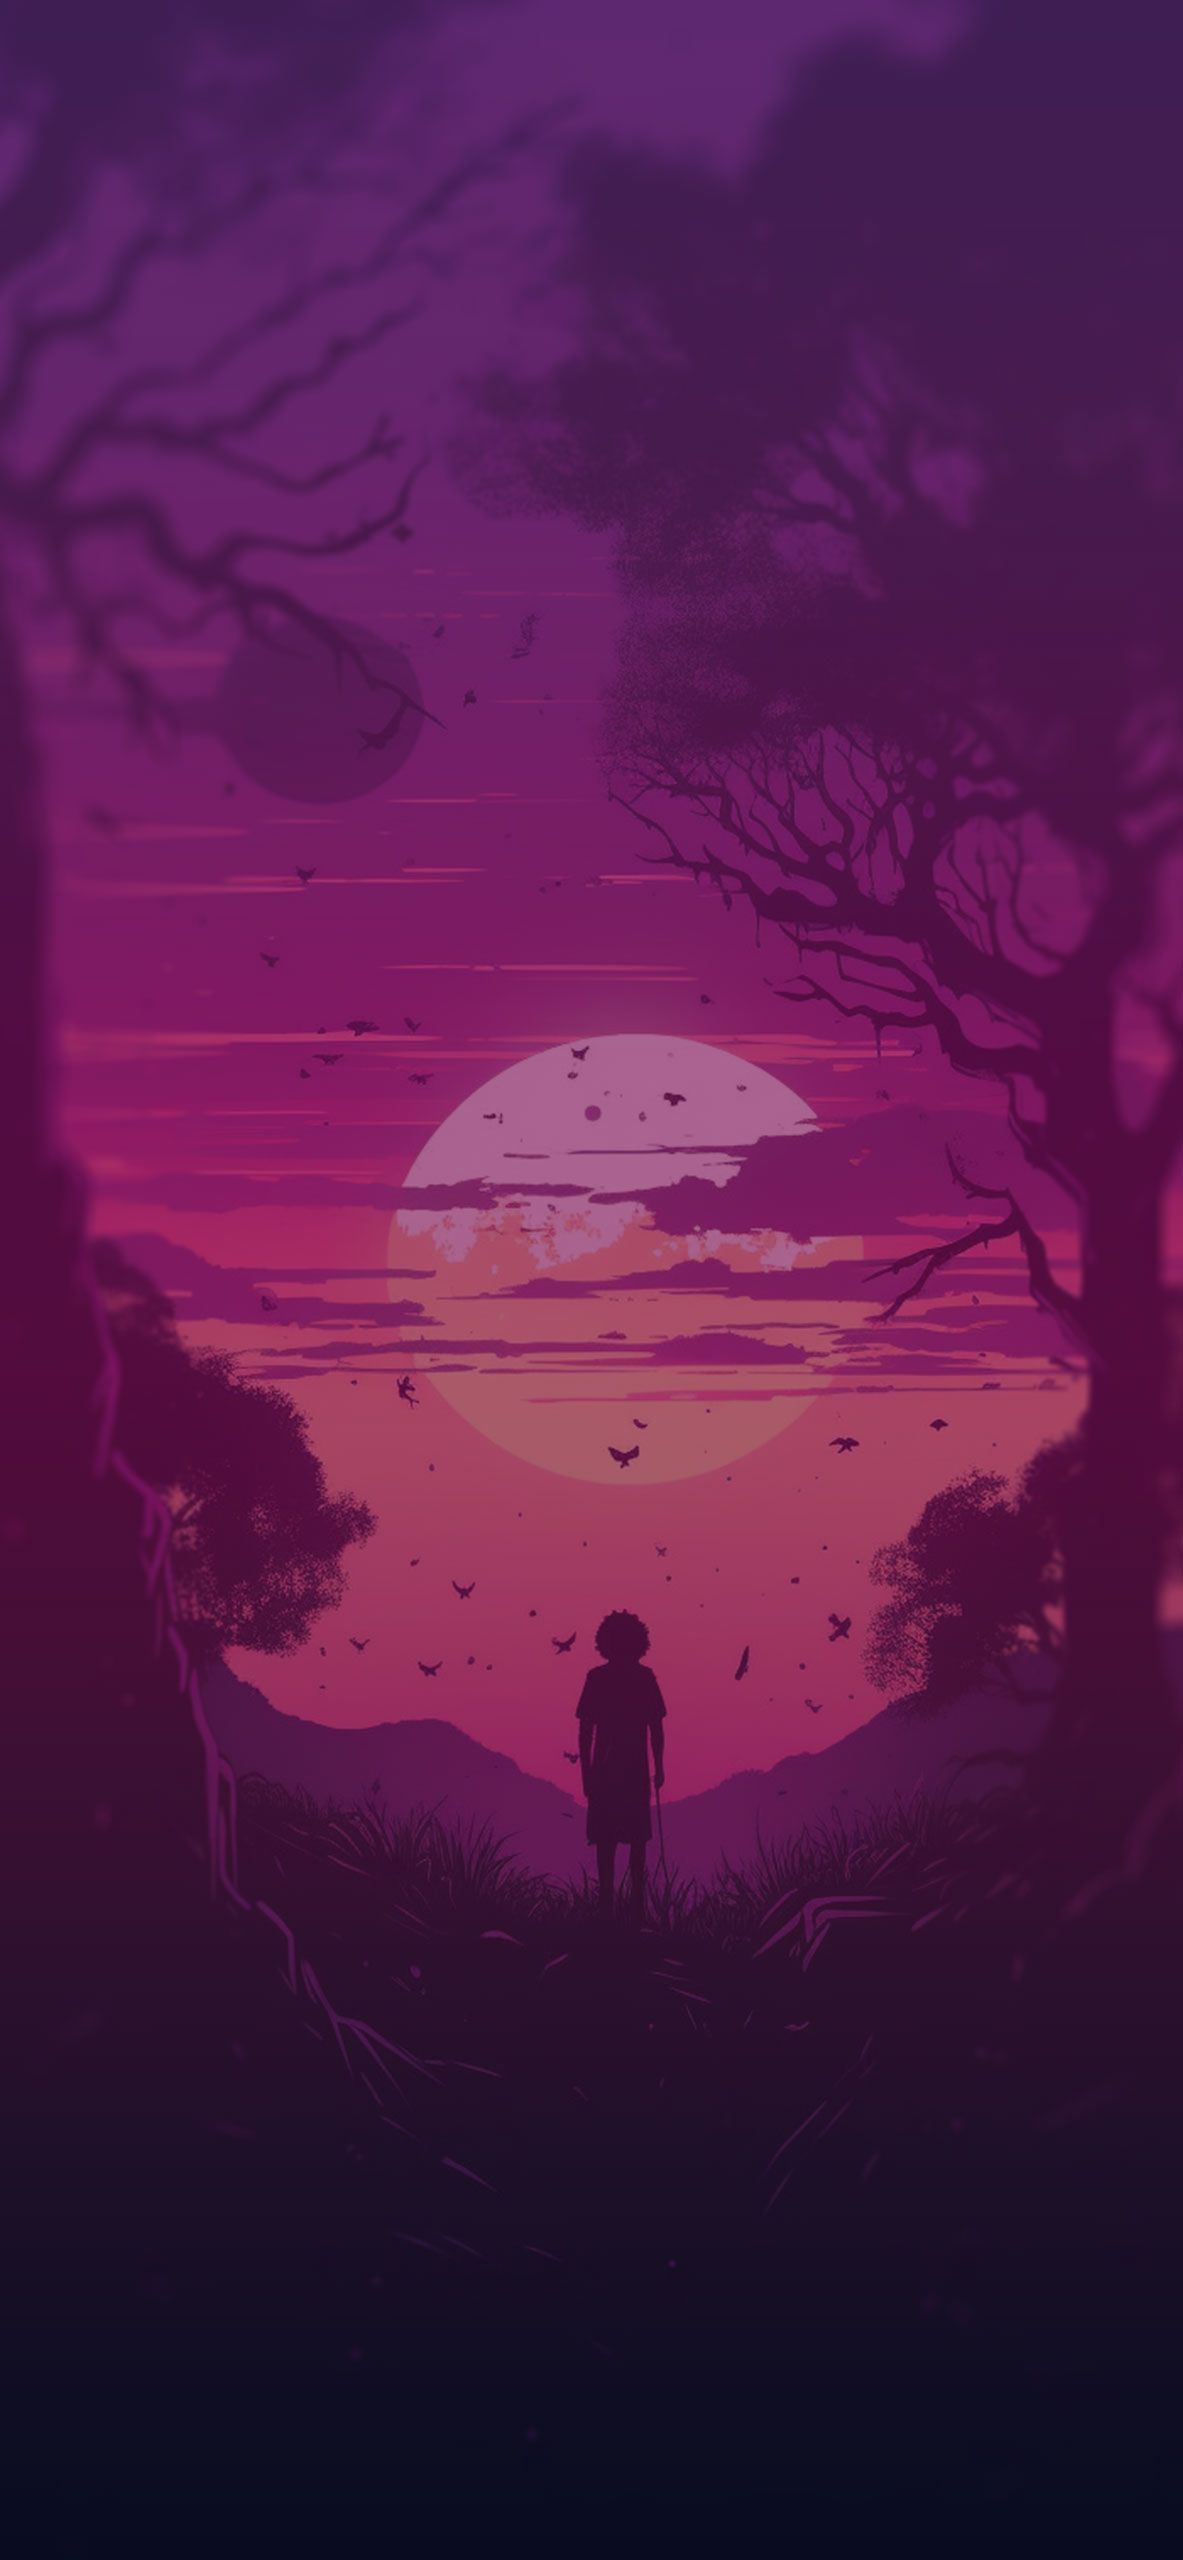 IPhone wallpaper of a person standing in a field with a purple sky - Violet, cool